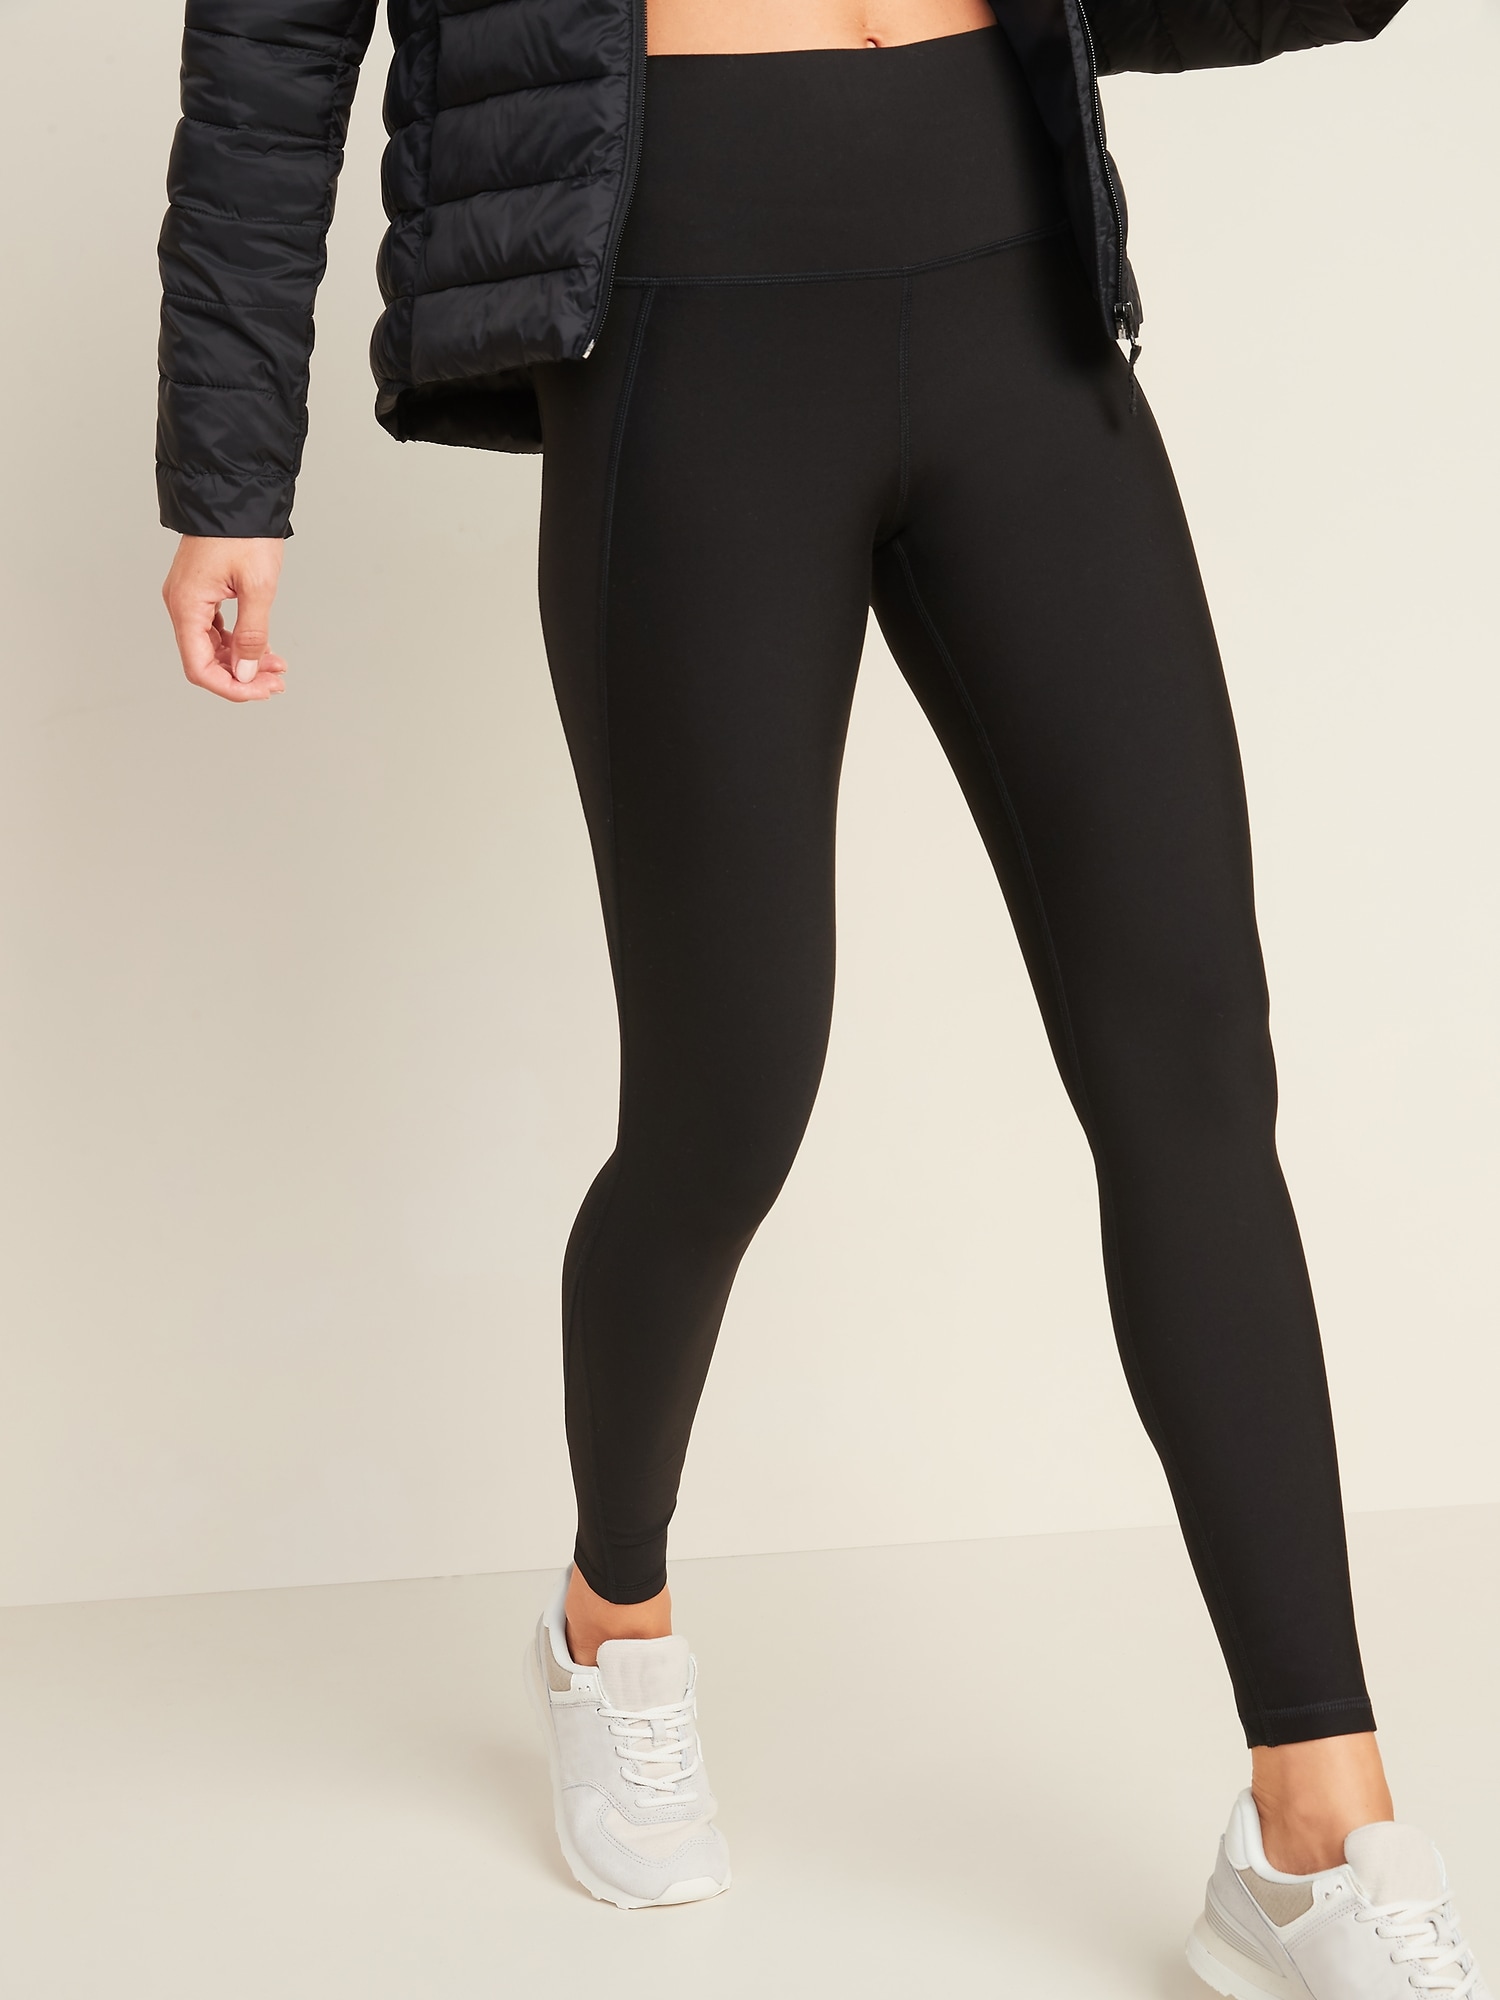 Old Navy, Pants & Jumpsuits, Old Navy Active Elevate Leggings